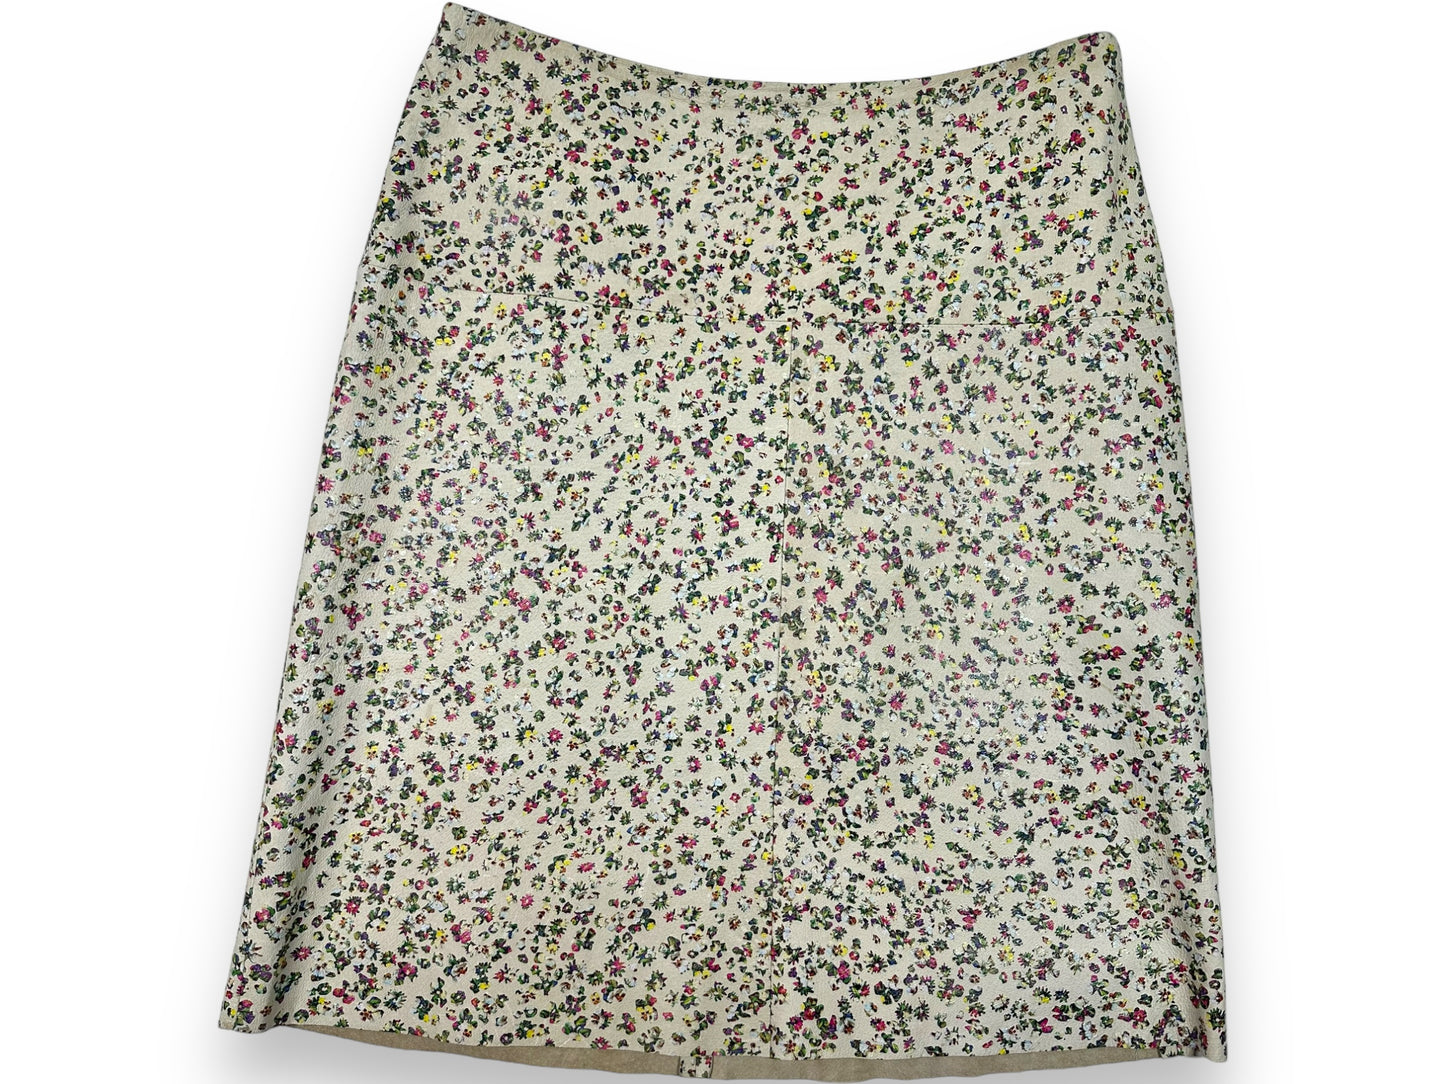 Vintage Cynthia Rowley Floral Leather Skirt